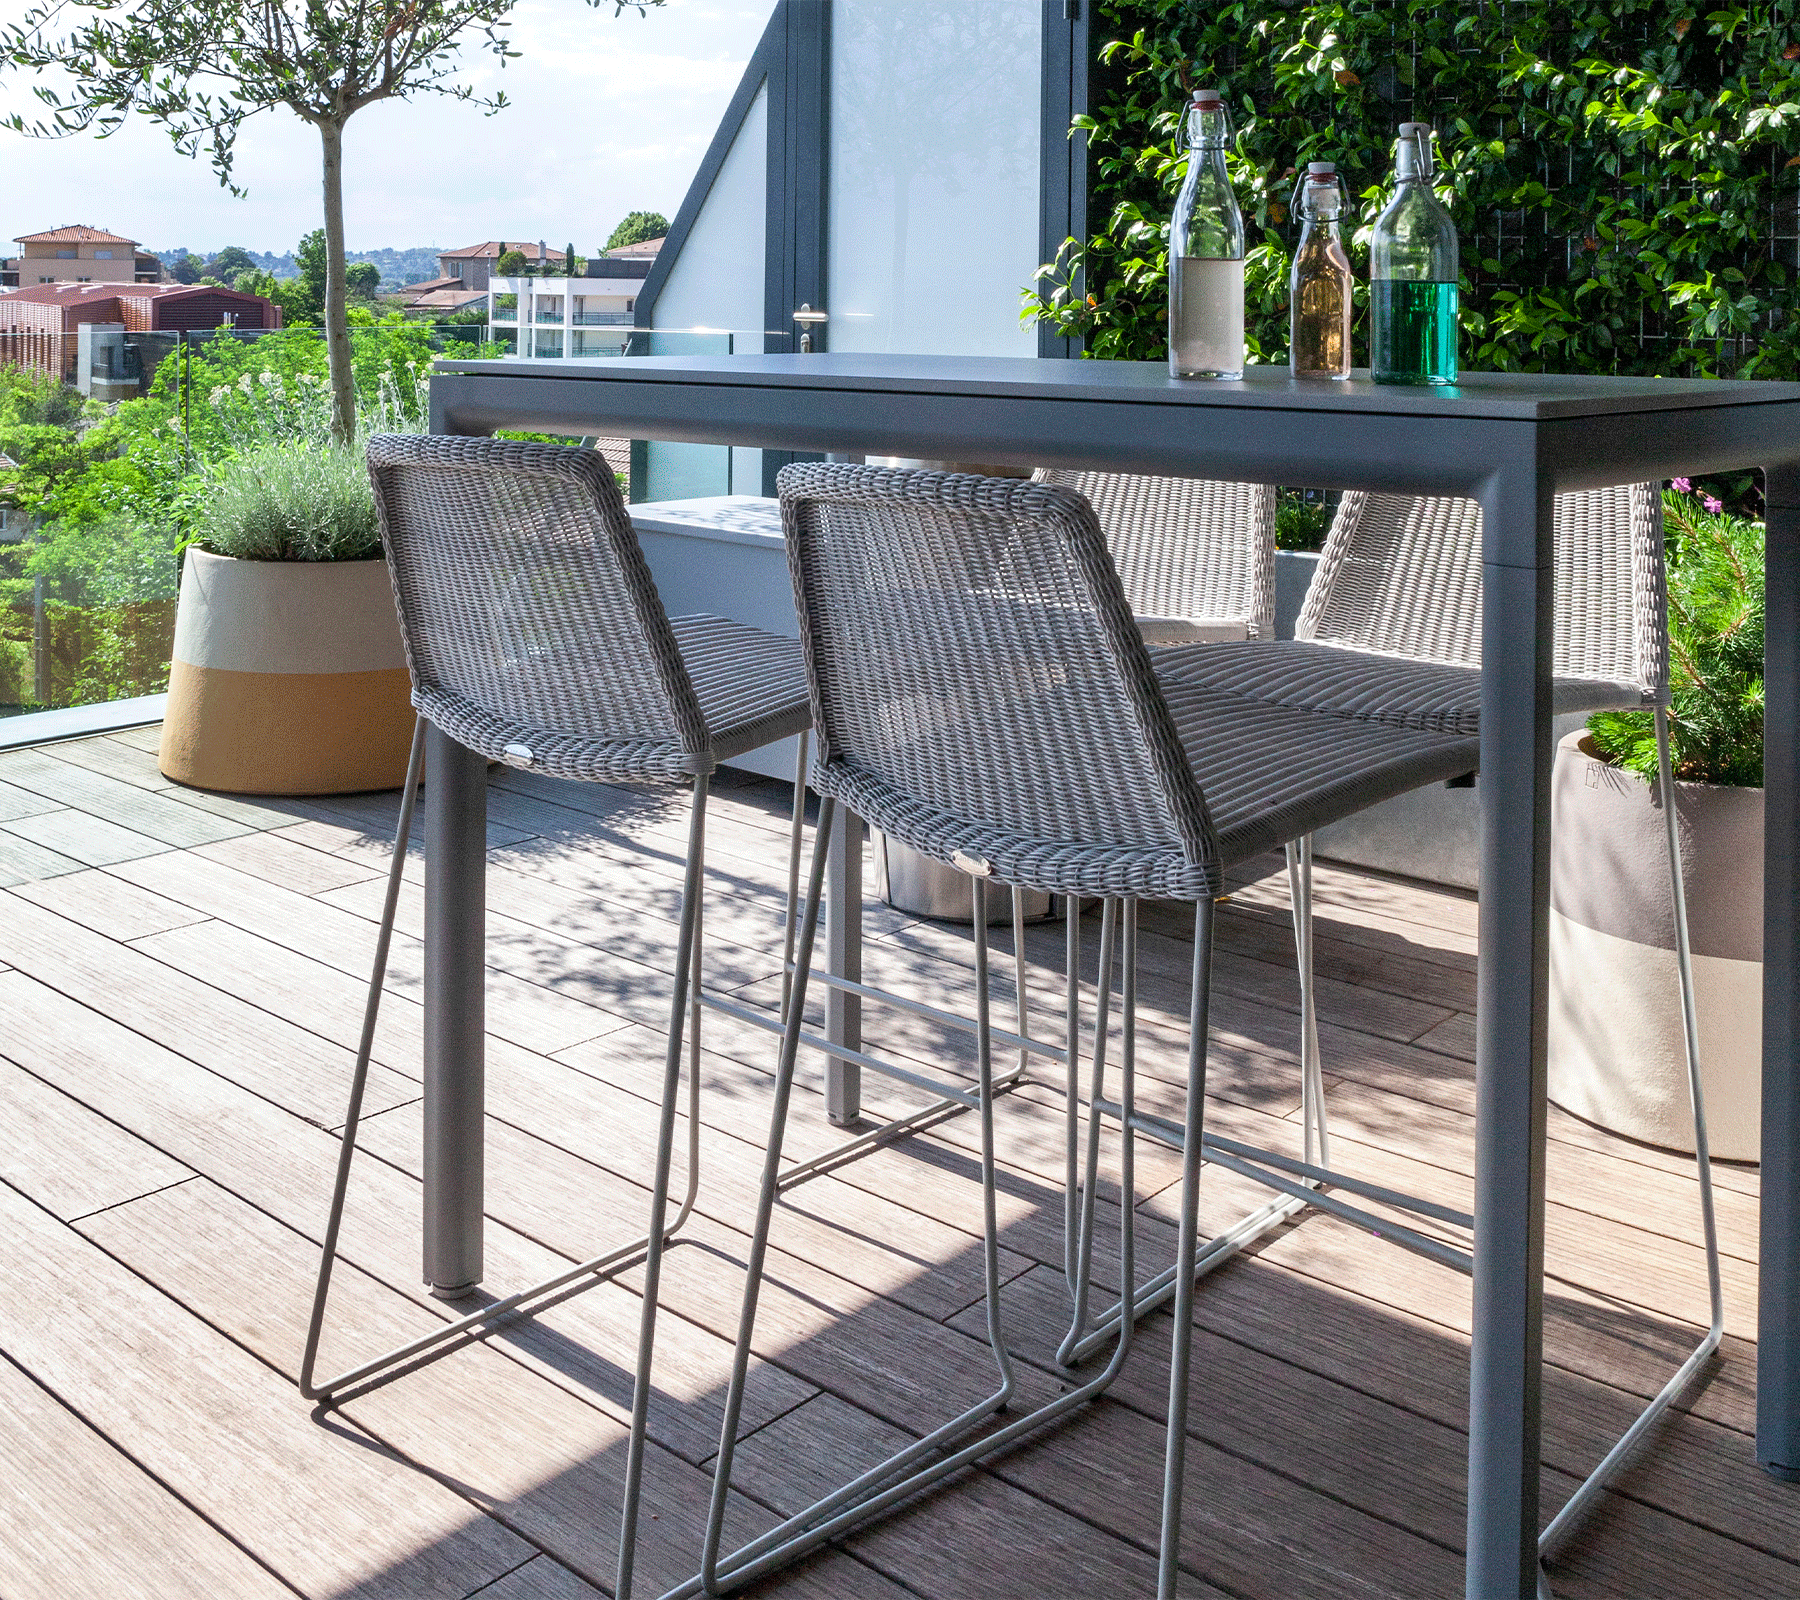 Boxhill's Breeze Bar Stackable Chair White lifestyle image with bar table on wooden platform balcony